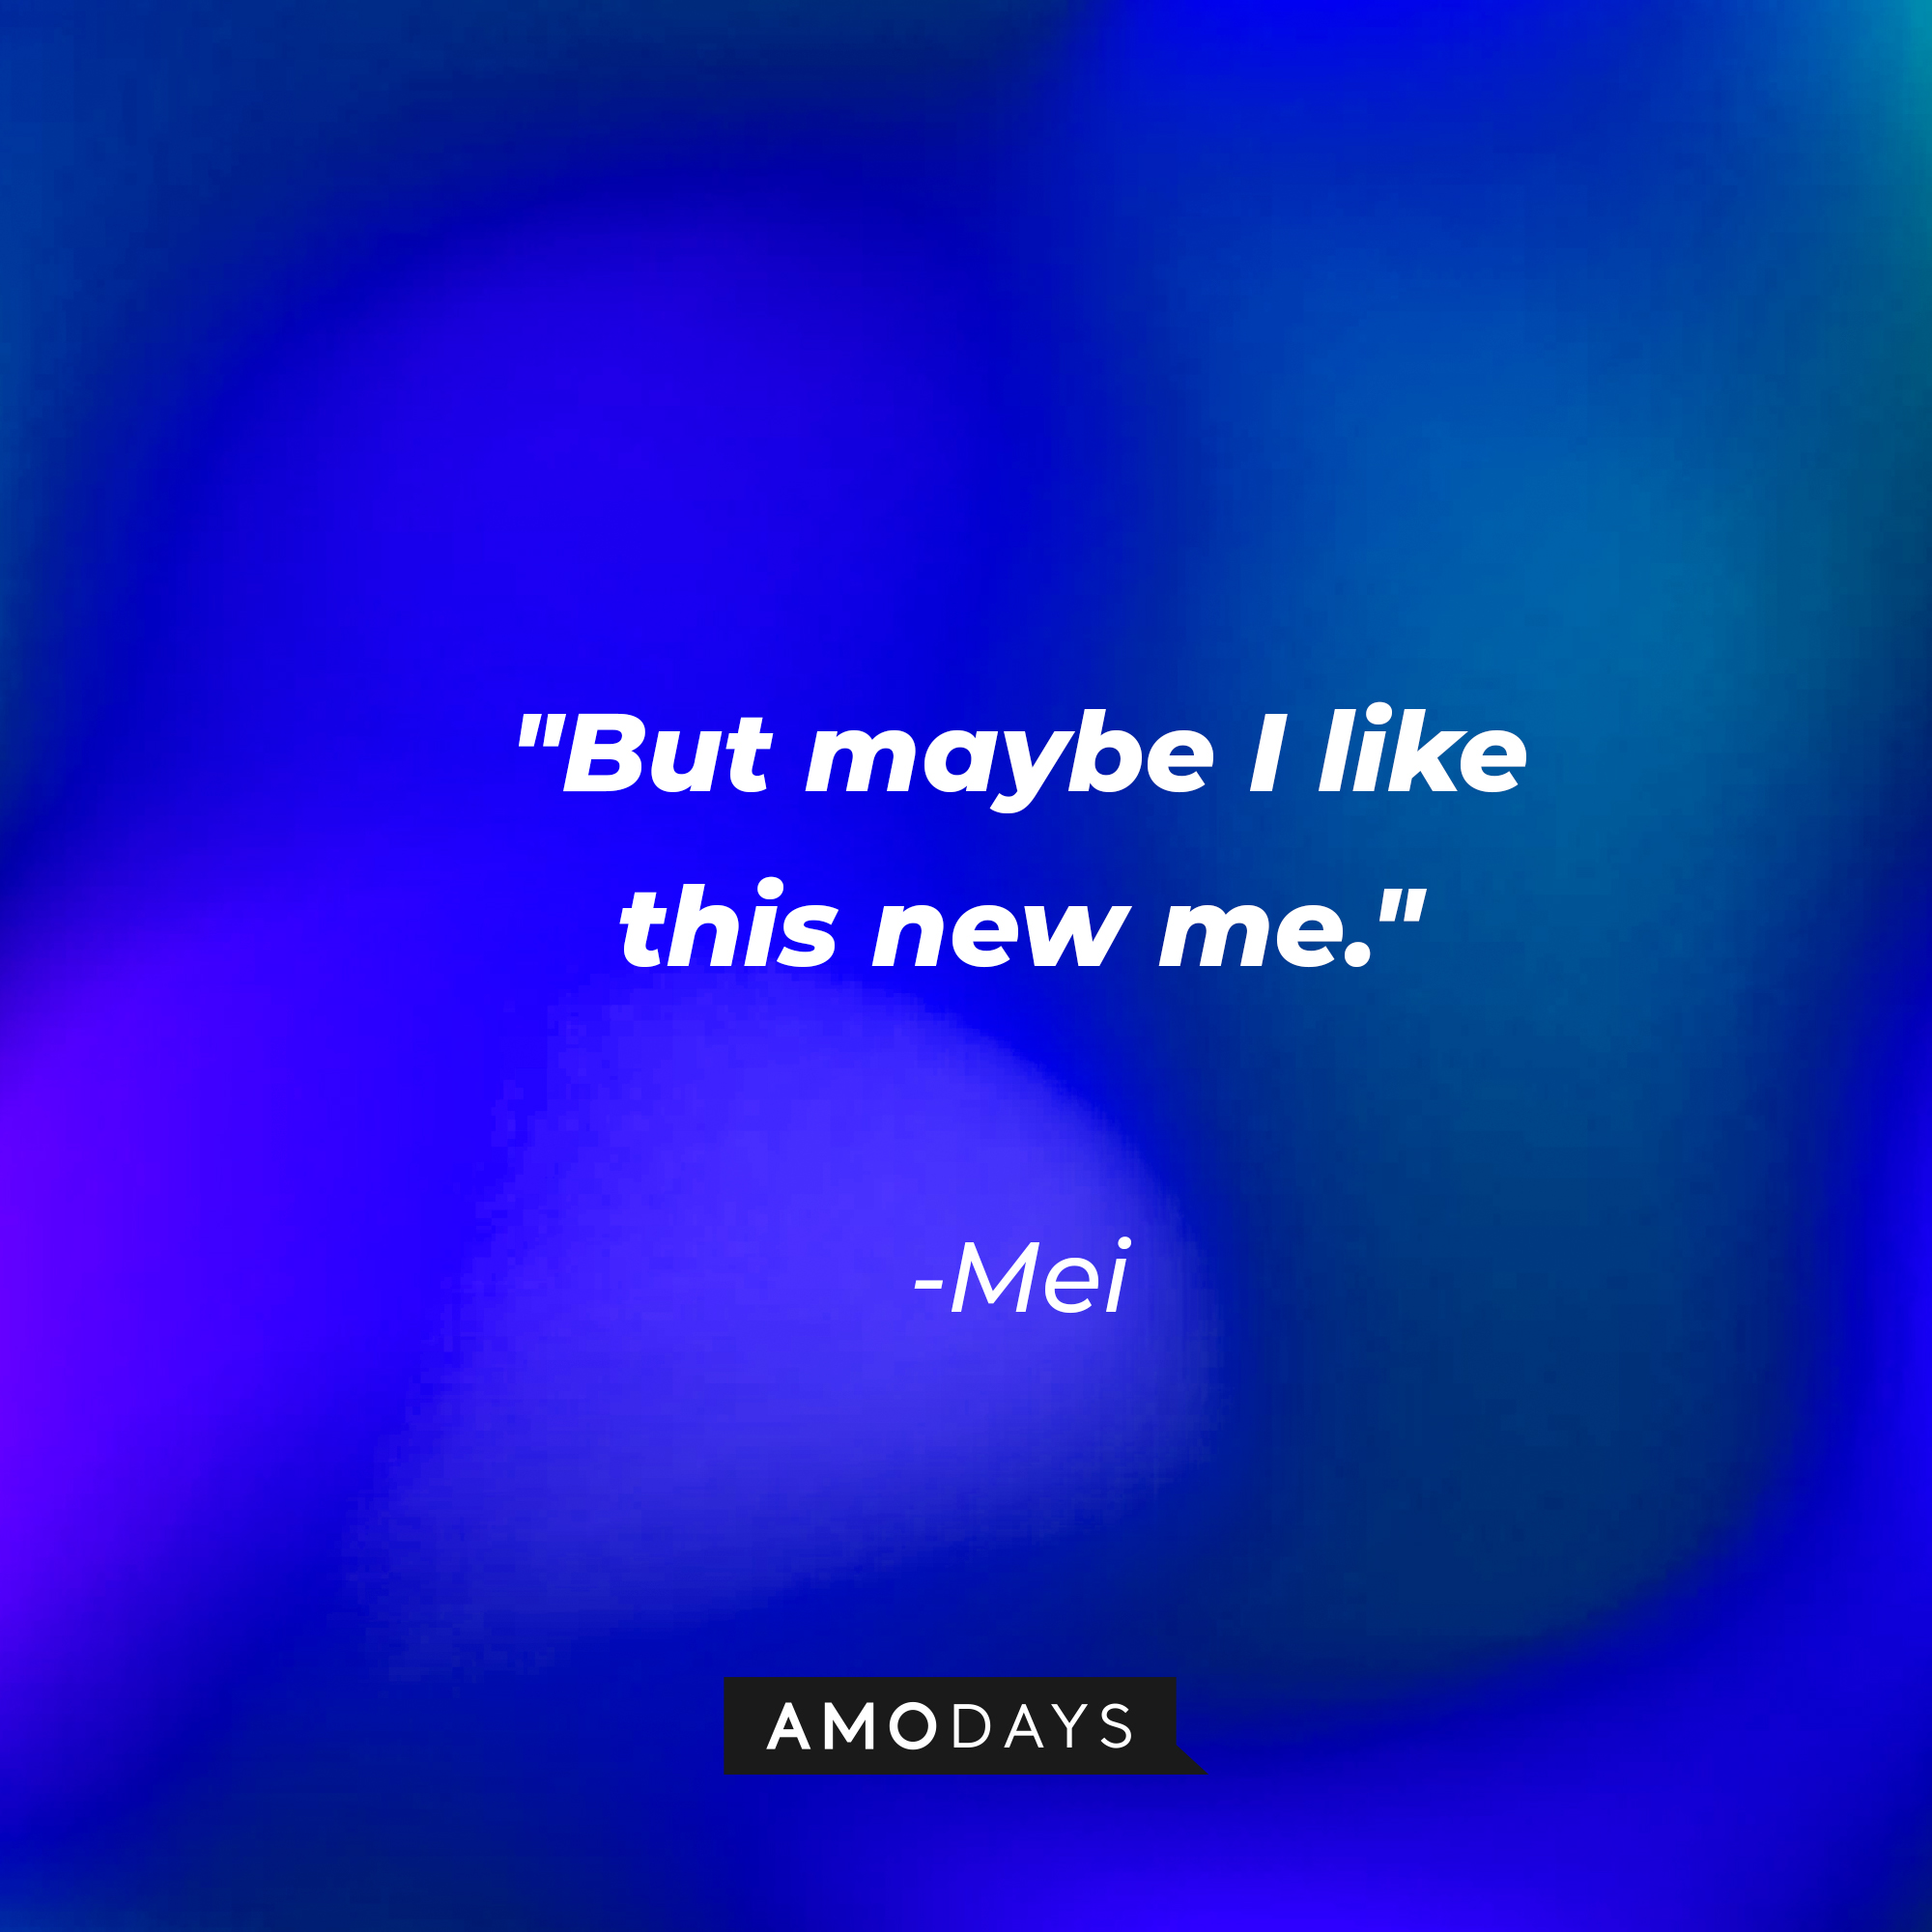 Mei's quote: "But maybe I like this new me." | Source: AmoDays